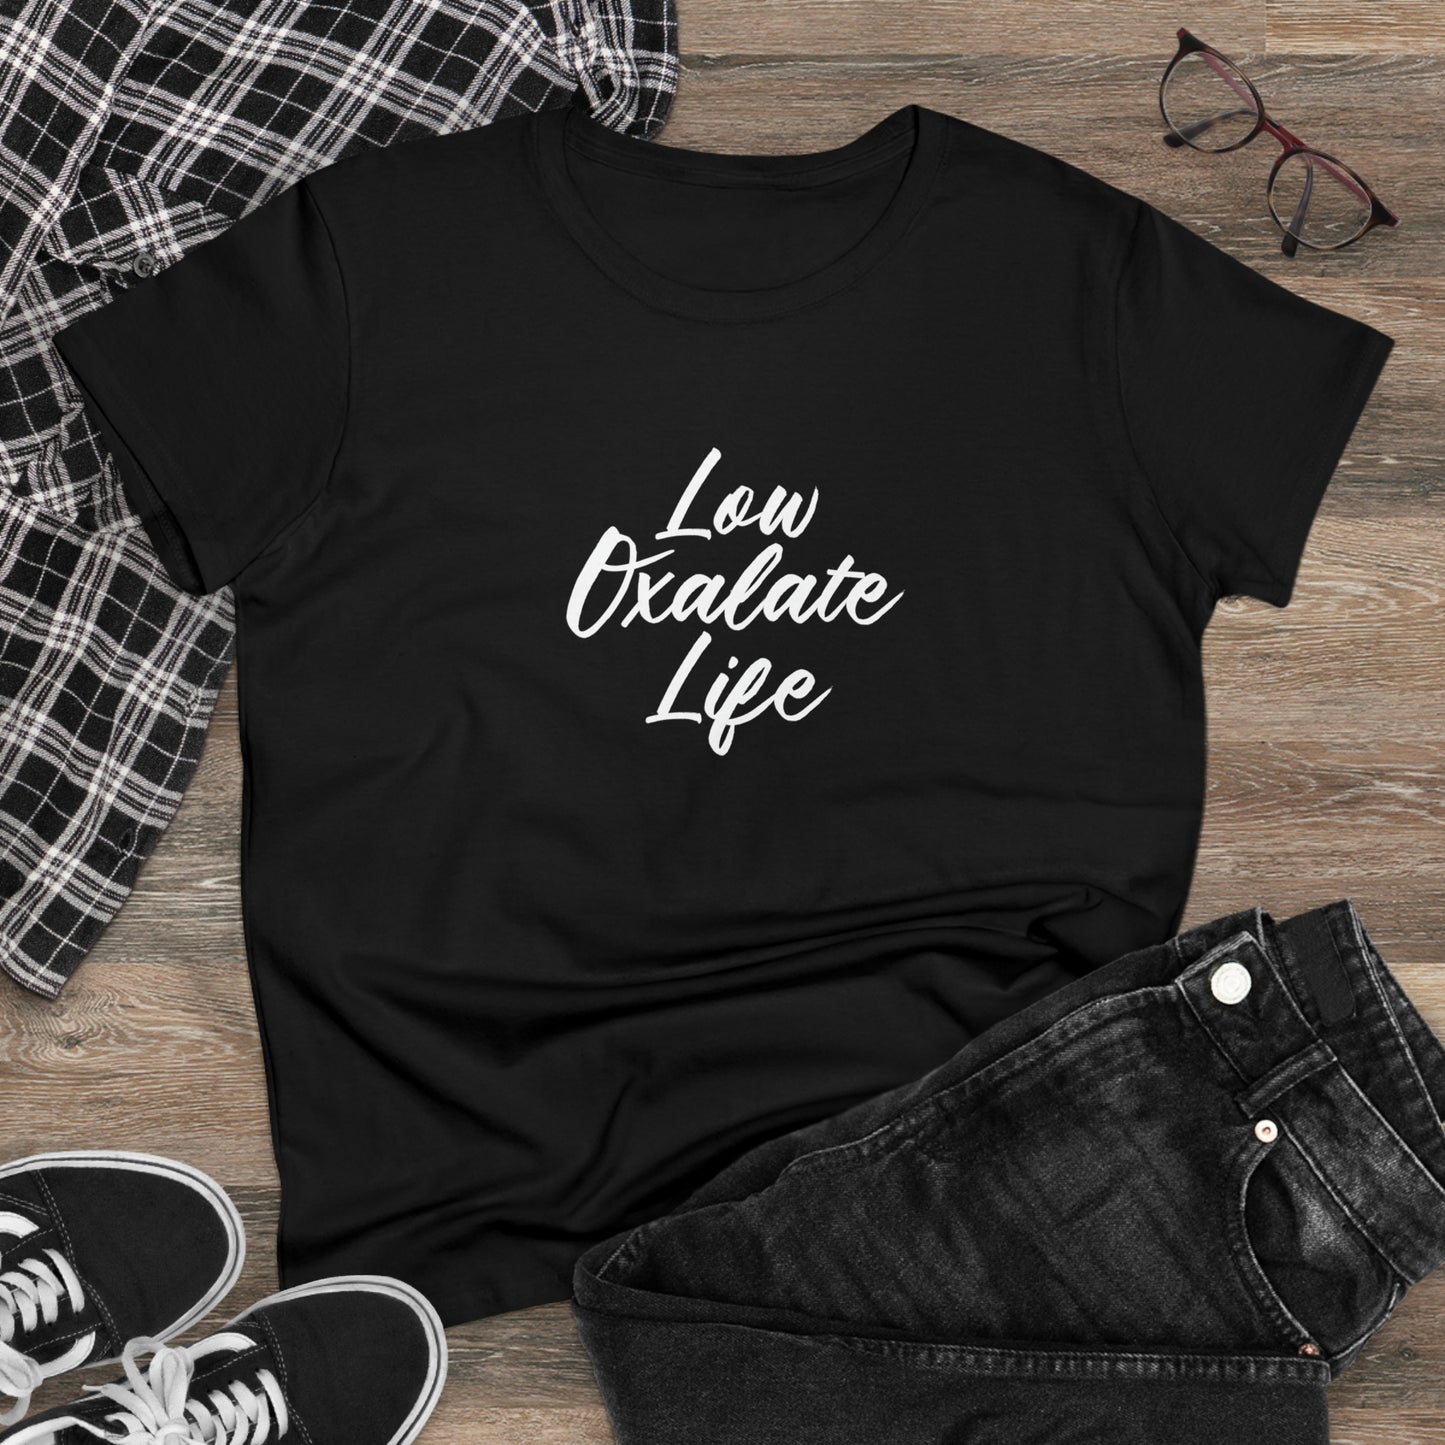 Women's Low Oxalate Life Shirt for the Health Conscious